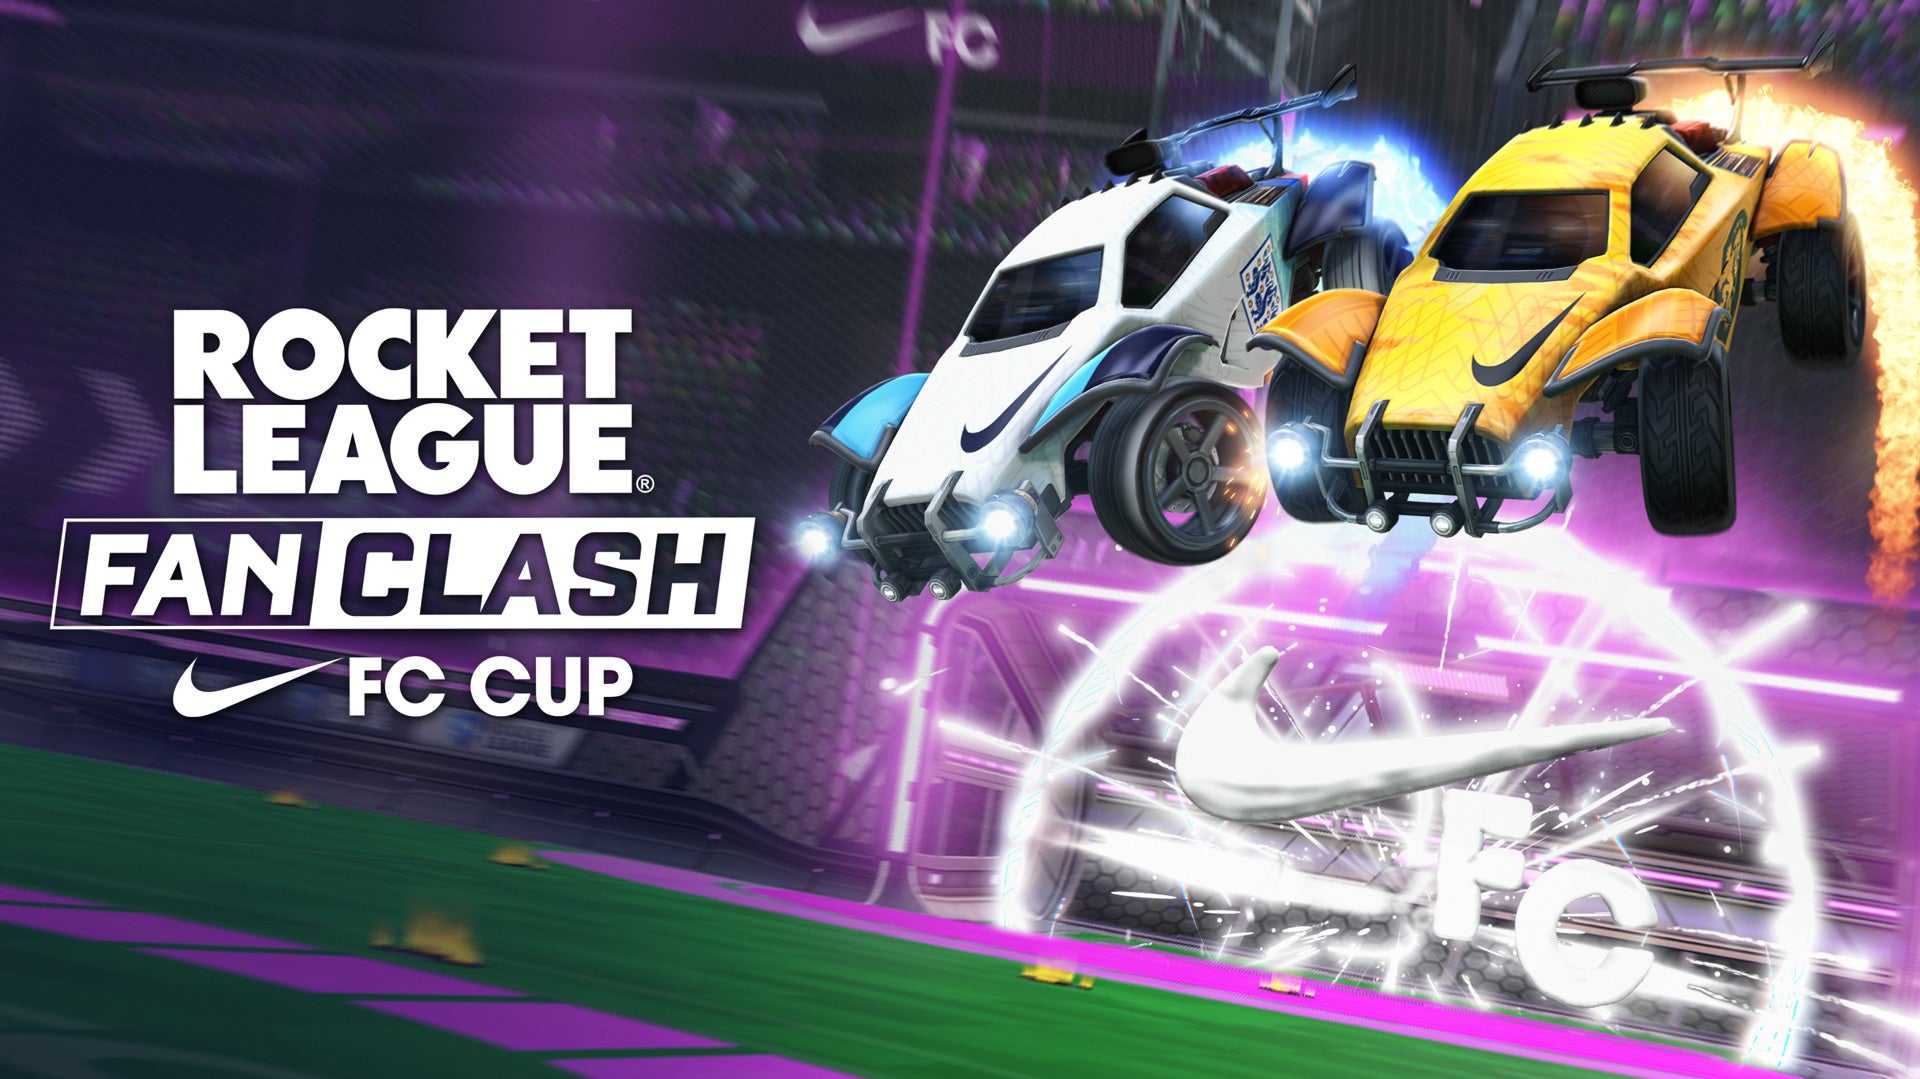 Image for Rocket League "celebrates football's biggest event" with the Nike FC Cup